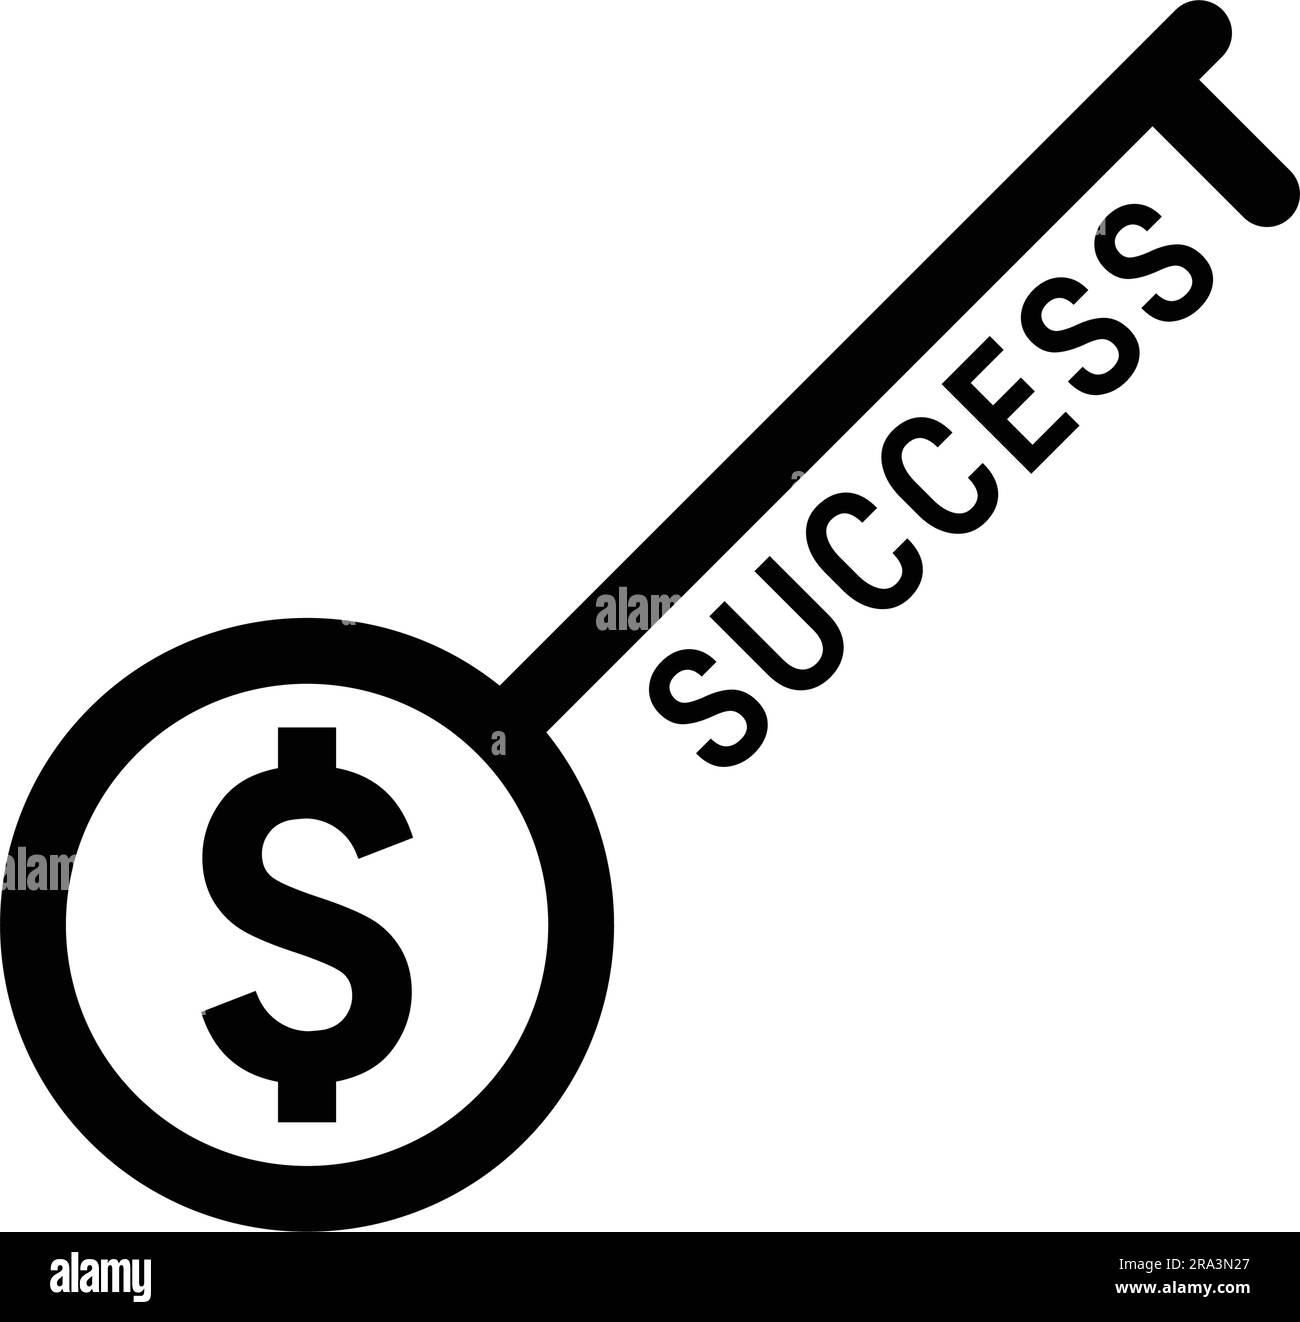 Business Success Key icon. Fully editable vector EPS use for printed materials and infographics, web or any kind of design project. Stock Vector